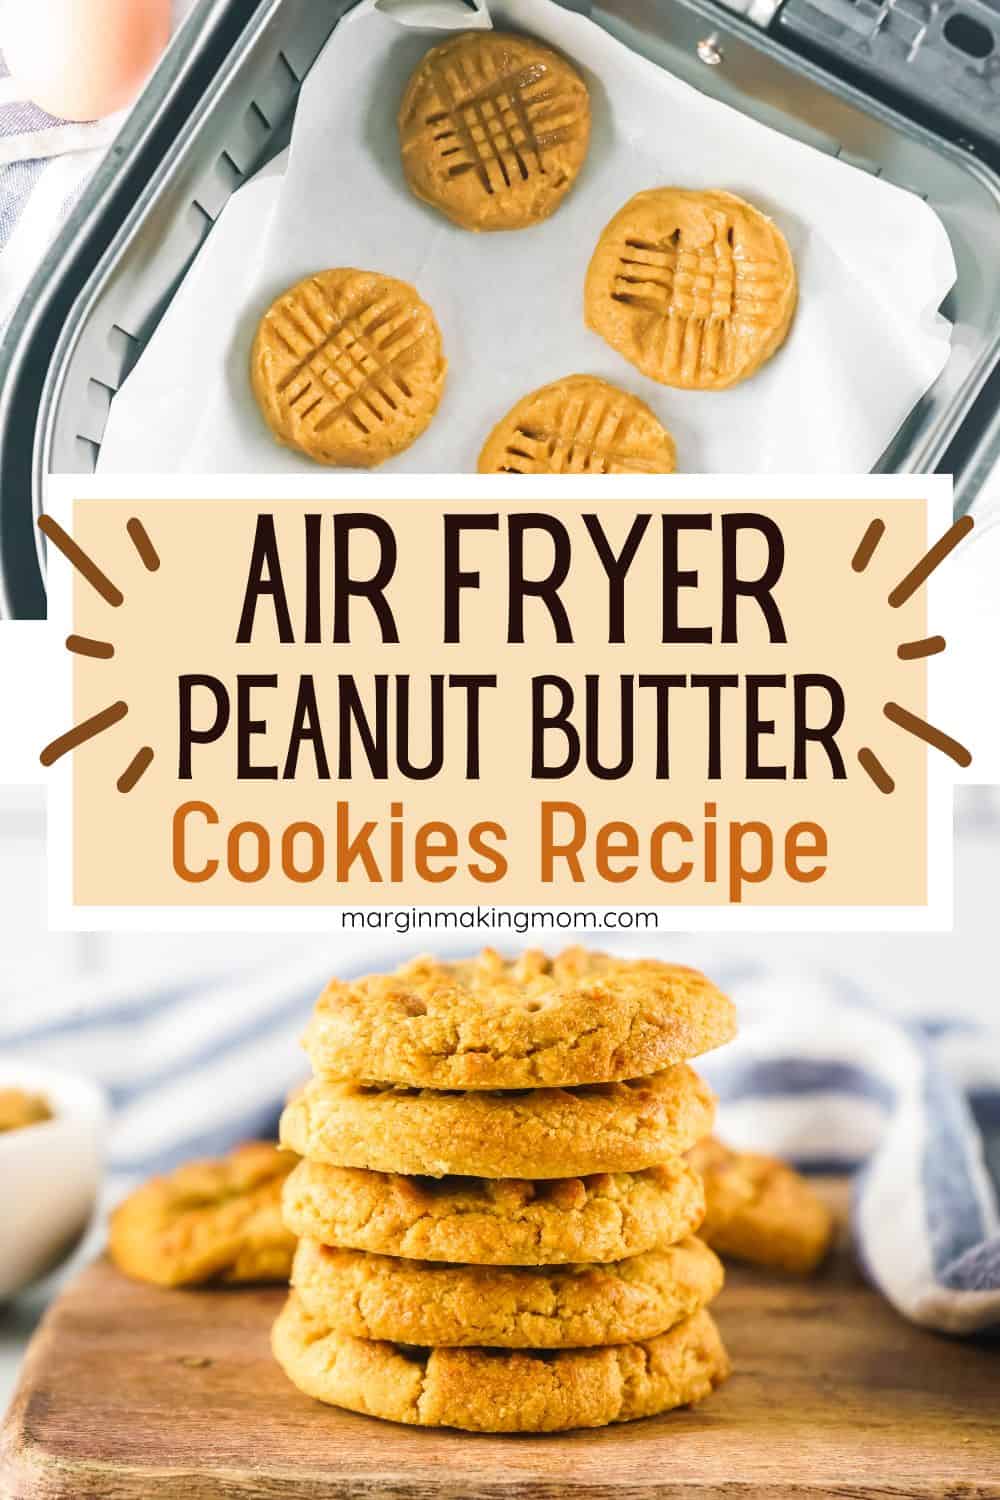 two photos; one shows peanut butter cookies in the air fryer basket, ready to be baked. The other shows a stack of freshly baked air fryer peanut butter cookies on a wooden board.